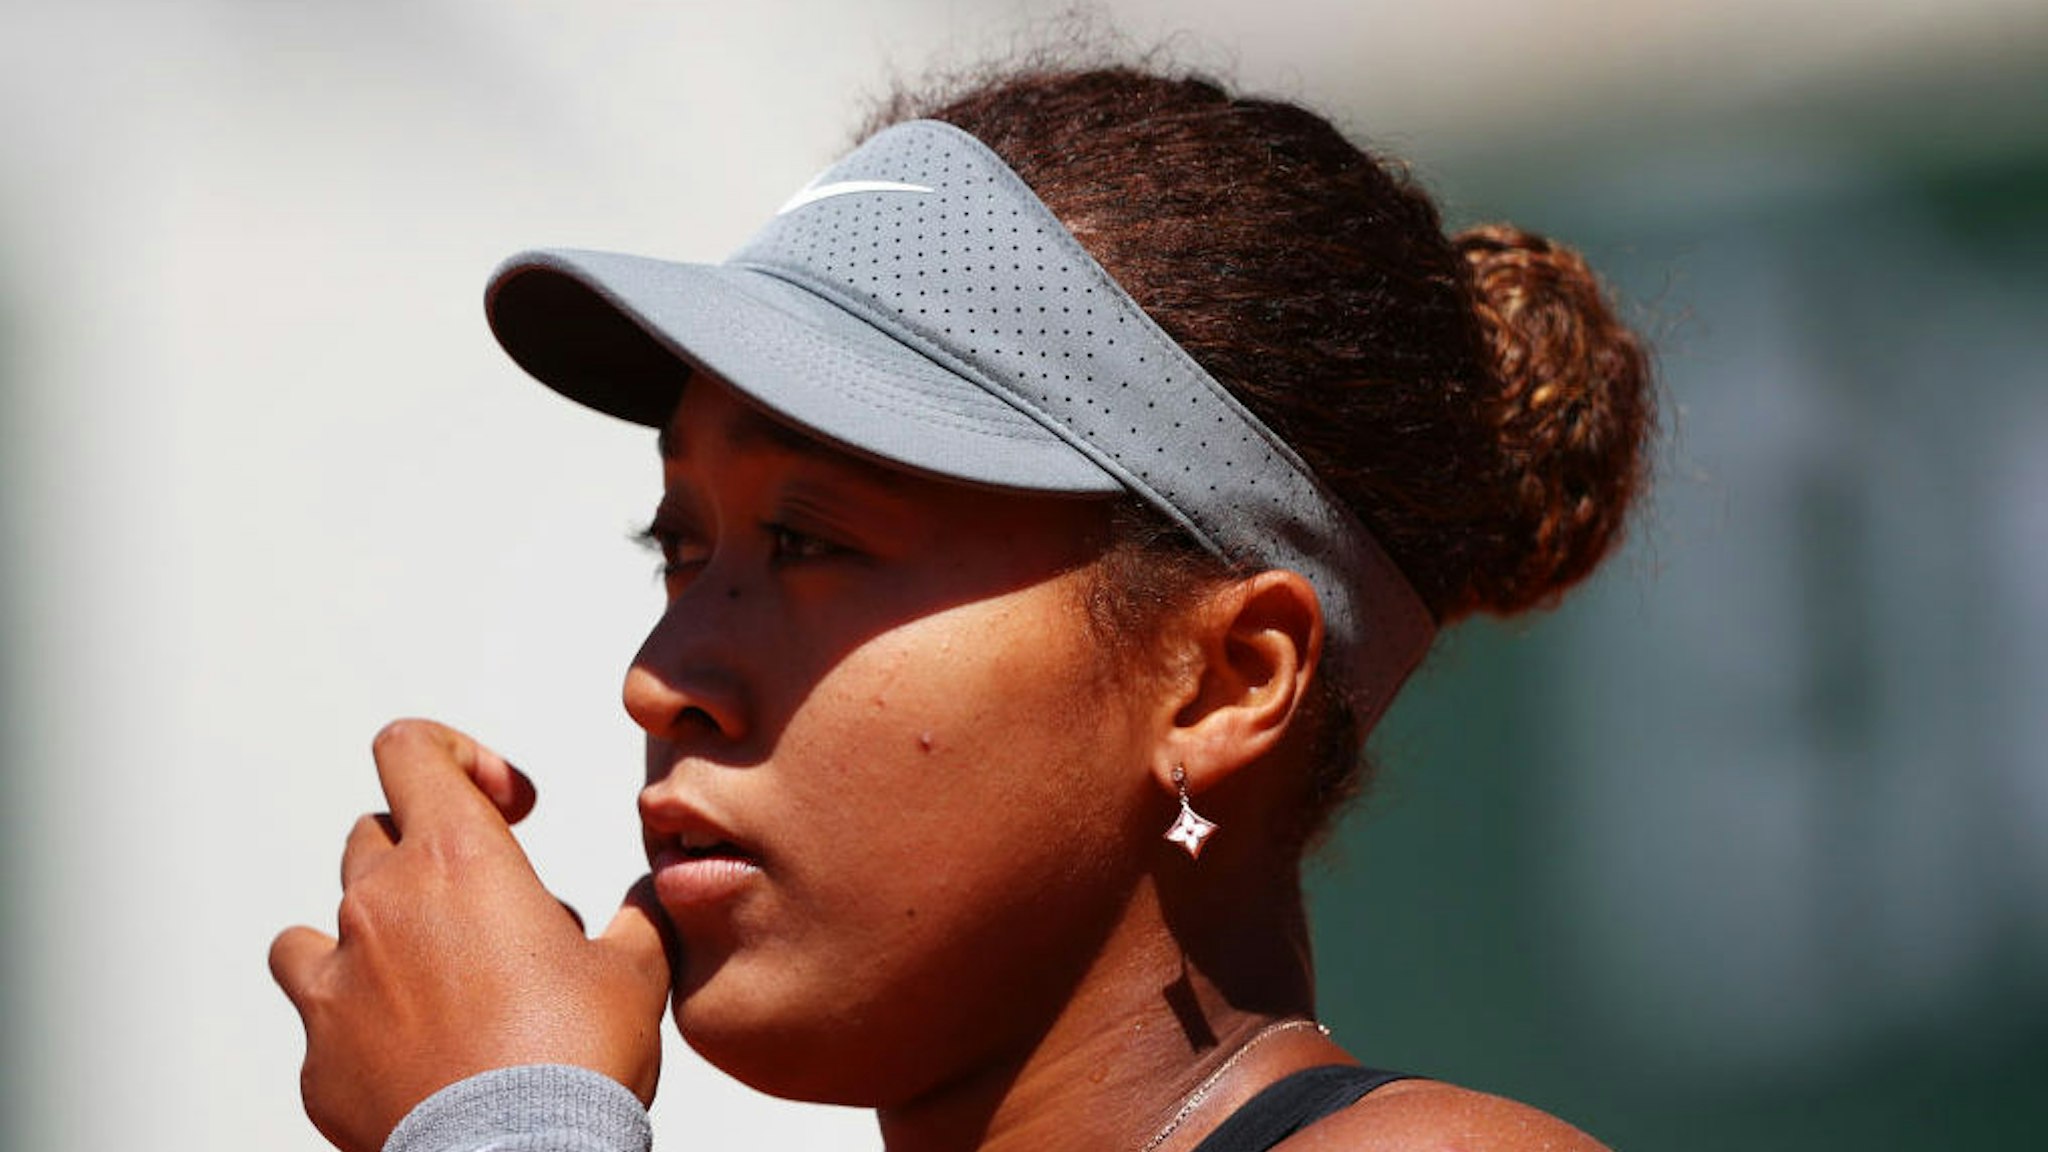 PARIS, FRANCE - MAY 30: Naomi Osaka of Japan looks on in her First Round match against Patricia Maria Tig of Romania during Day One of the 2021 French Open at Roland Garros on May 30, 2021 in Paris, France.